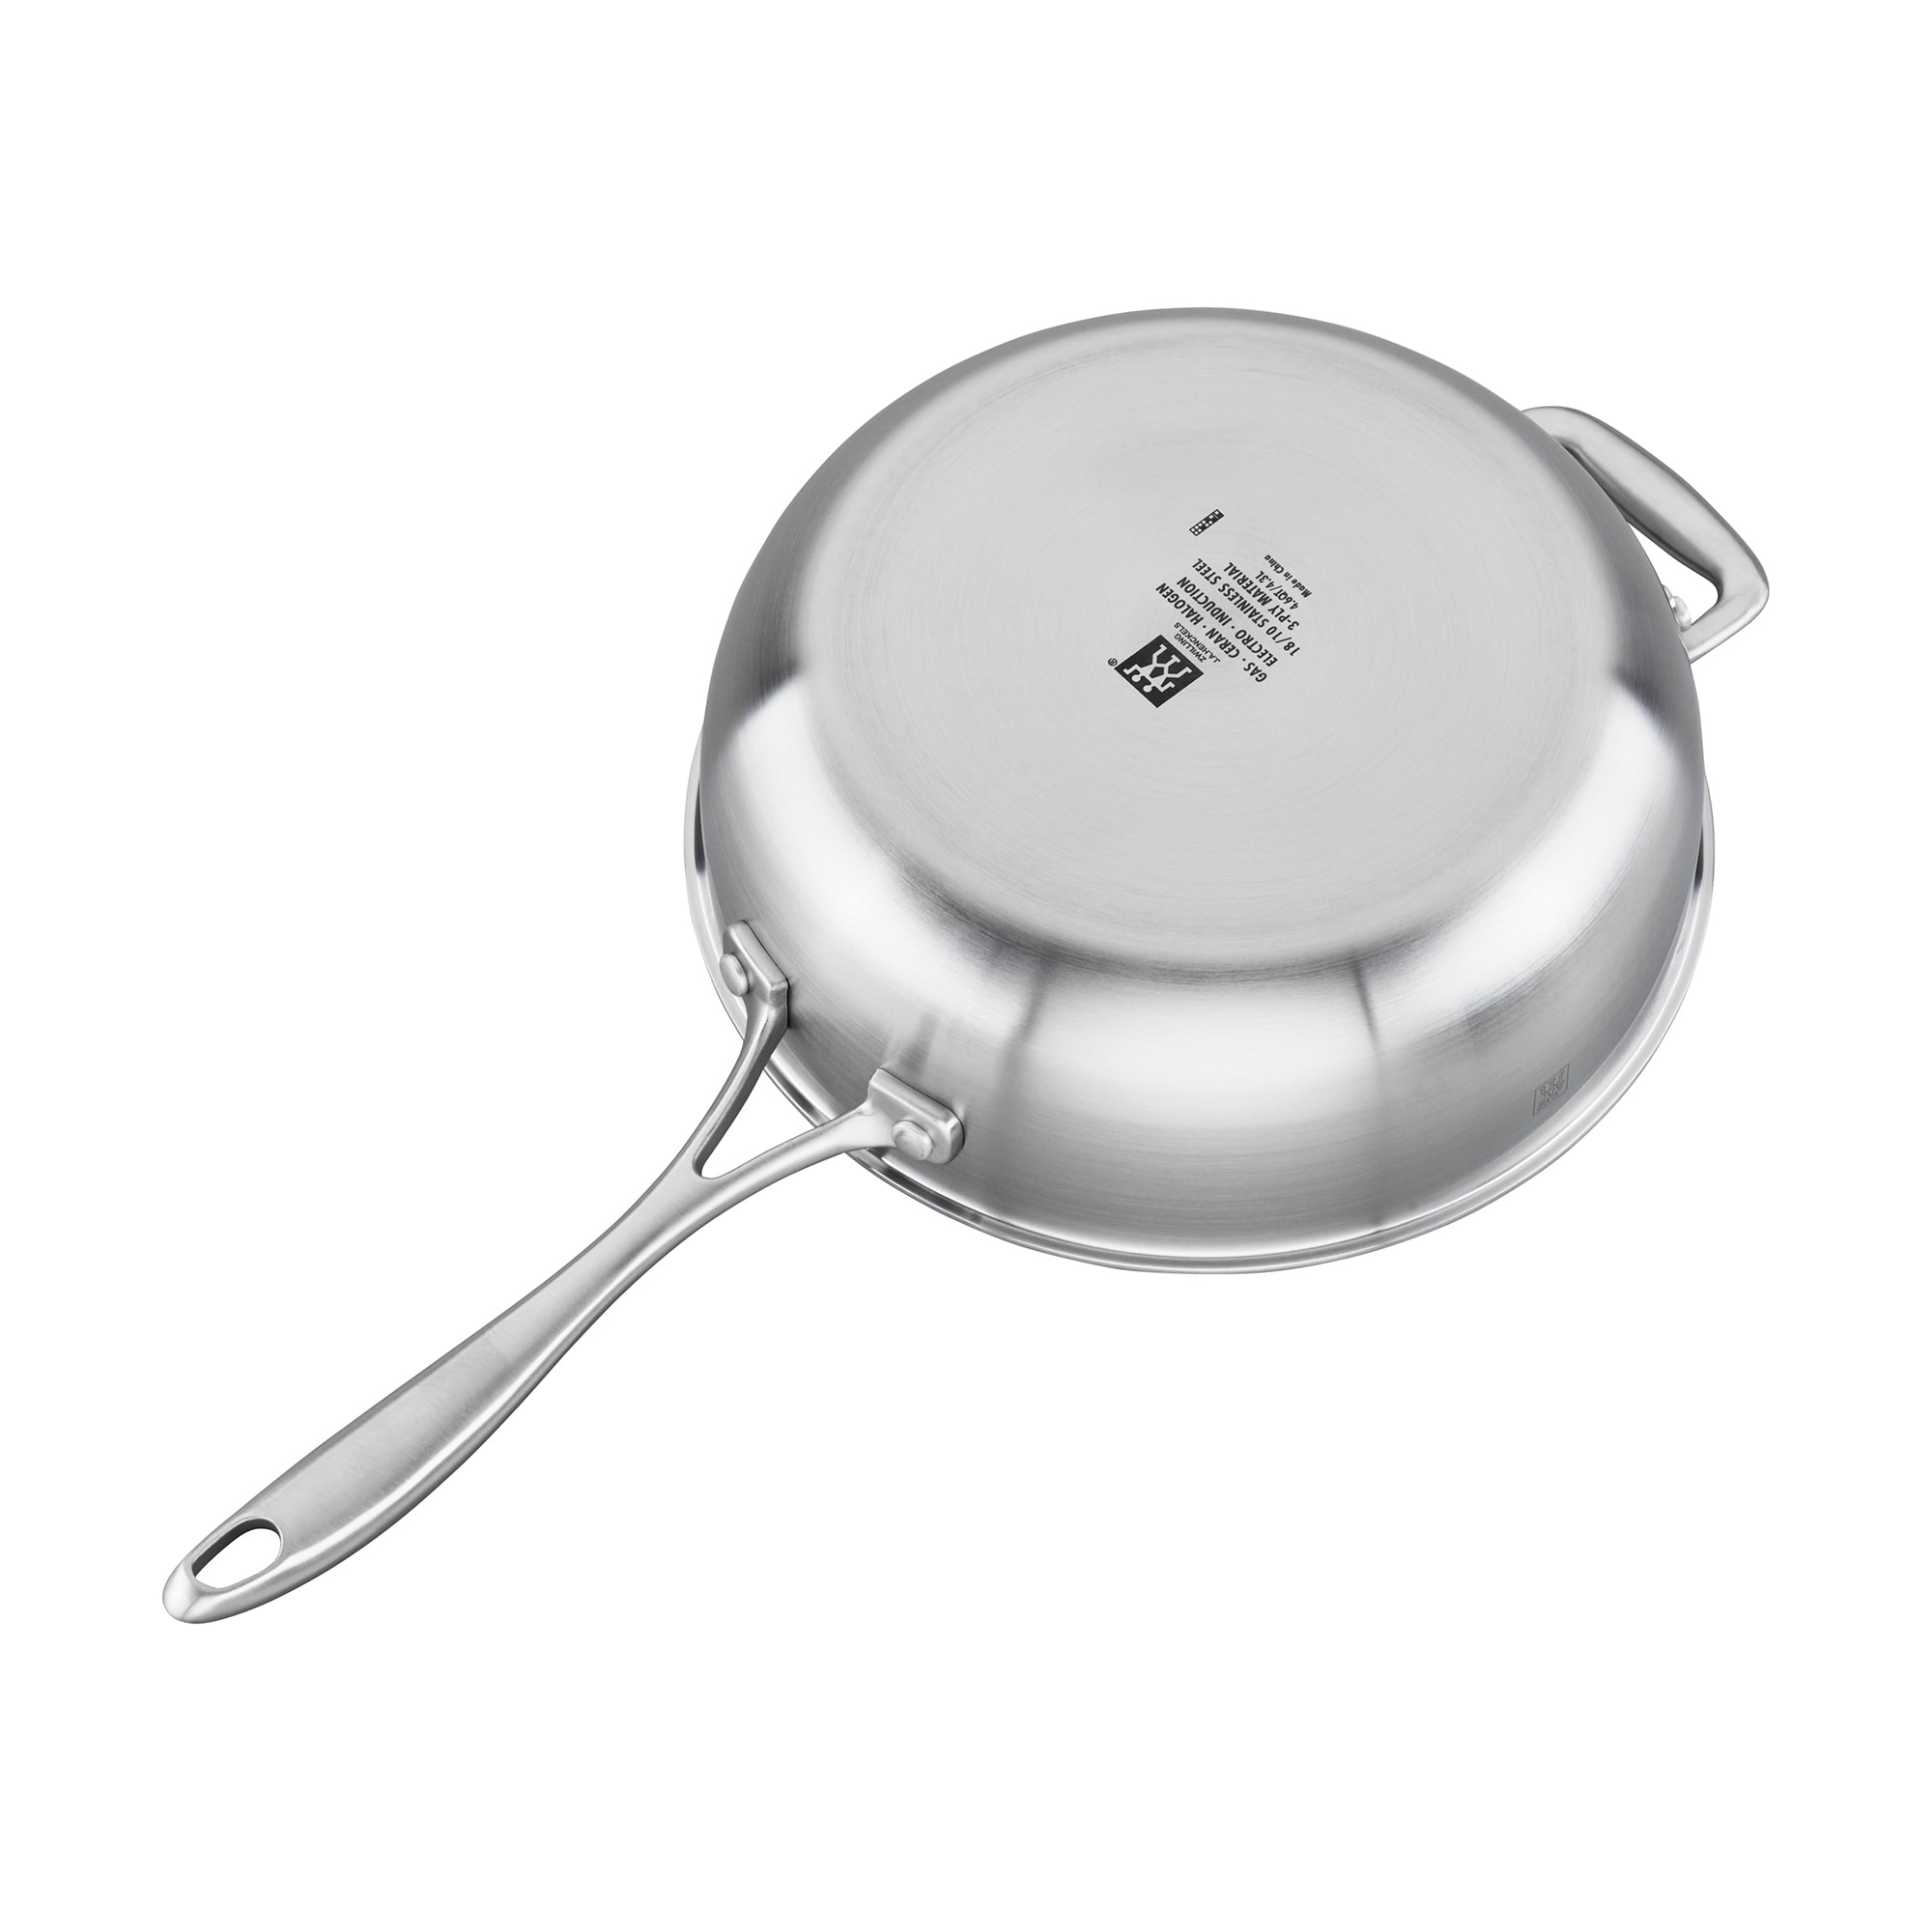 https://ak1.ostkcdn.com/images/products/is/images/direct/2bd8aa72e50c17809c6c41e3090e9695a90f7af3/ZWILLING-Spirit-3-ply-4.6-qt-Stainless-Steel-Ceramic-Nonstick-Perfect-Pan.jpg